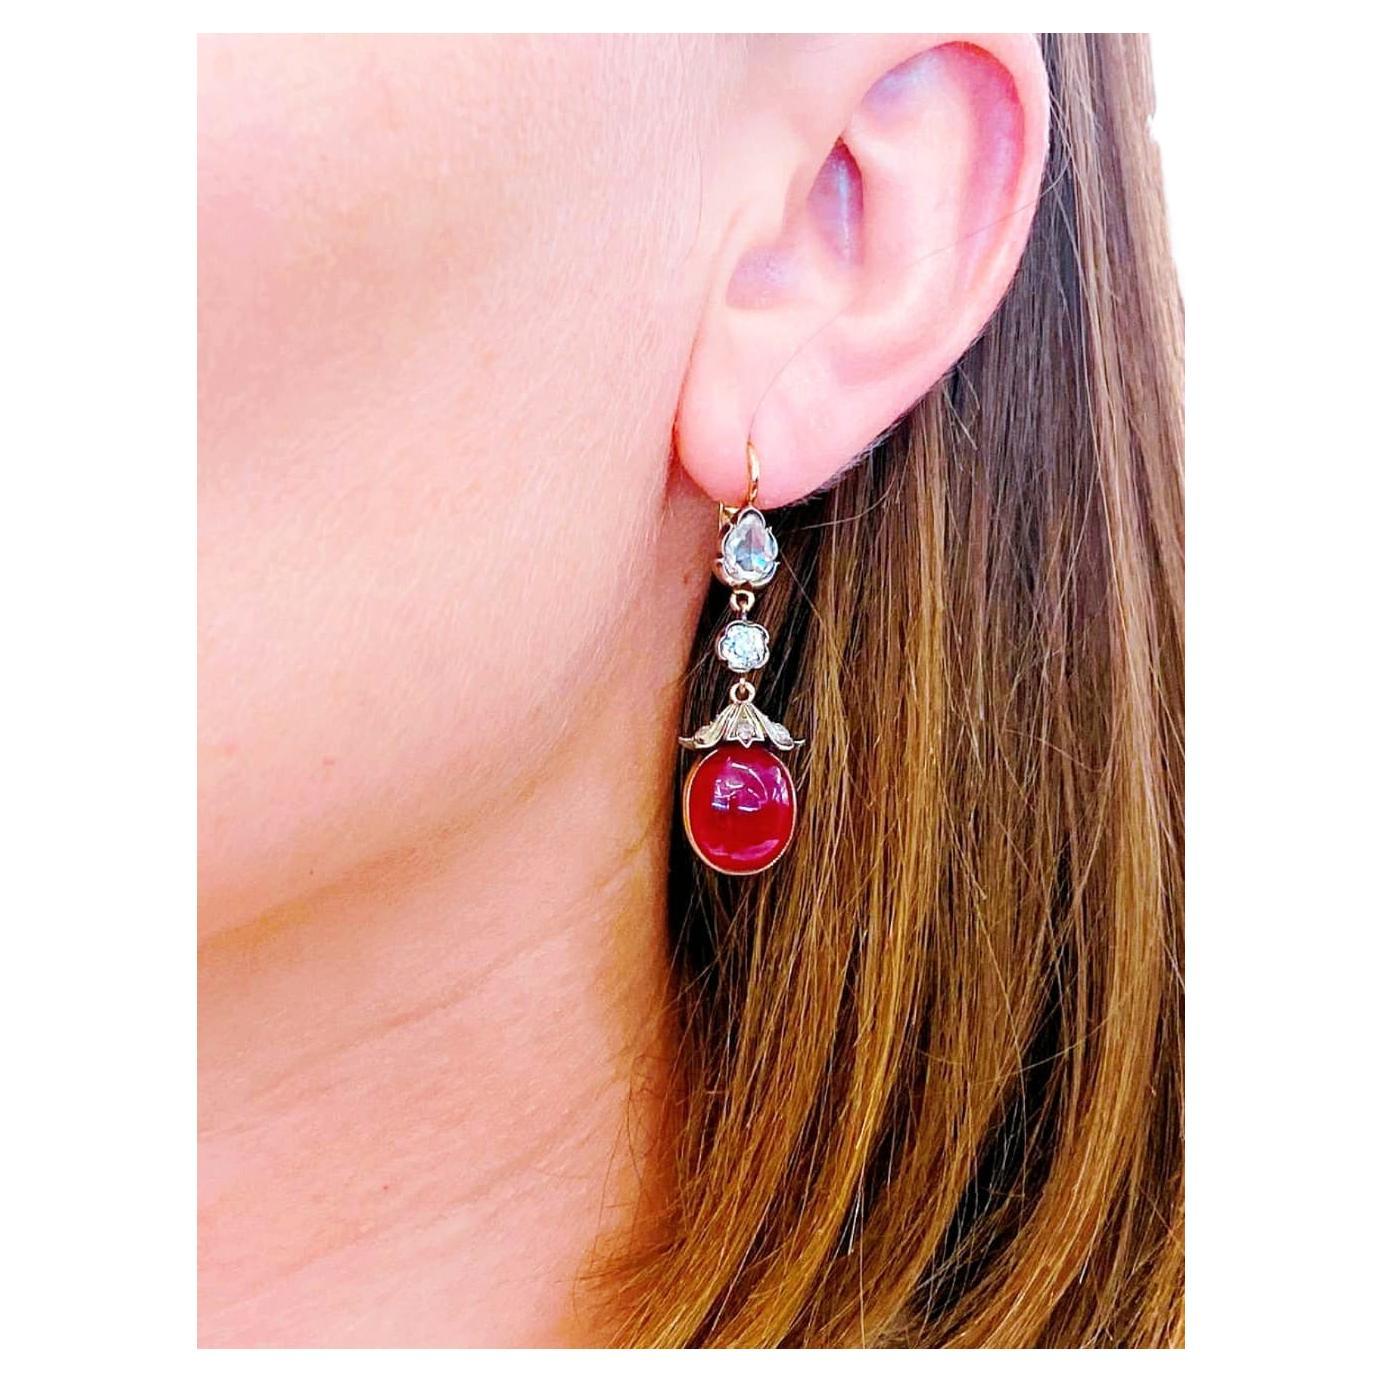 14k gold large dangling earrings with rose cut diamonds estimate weight of 2 carats and 2 natural oval cabouchon cut rubies in pegion blood colour earrings lenght 4cm 